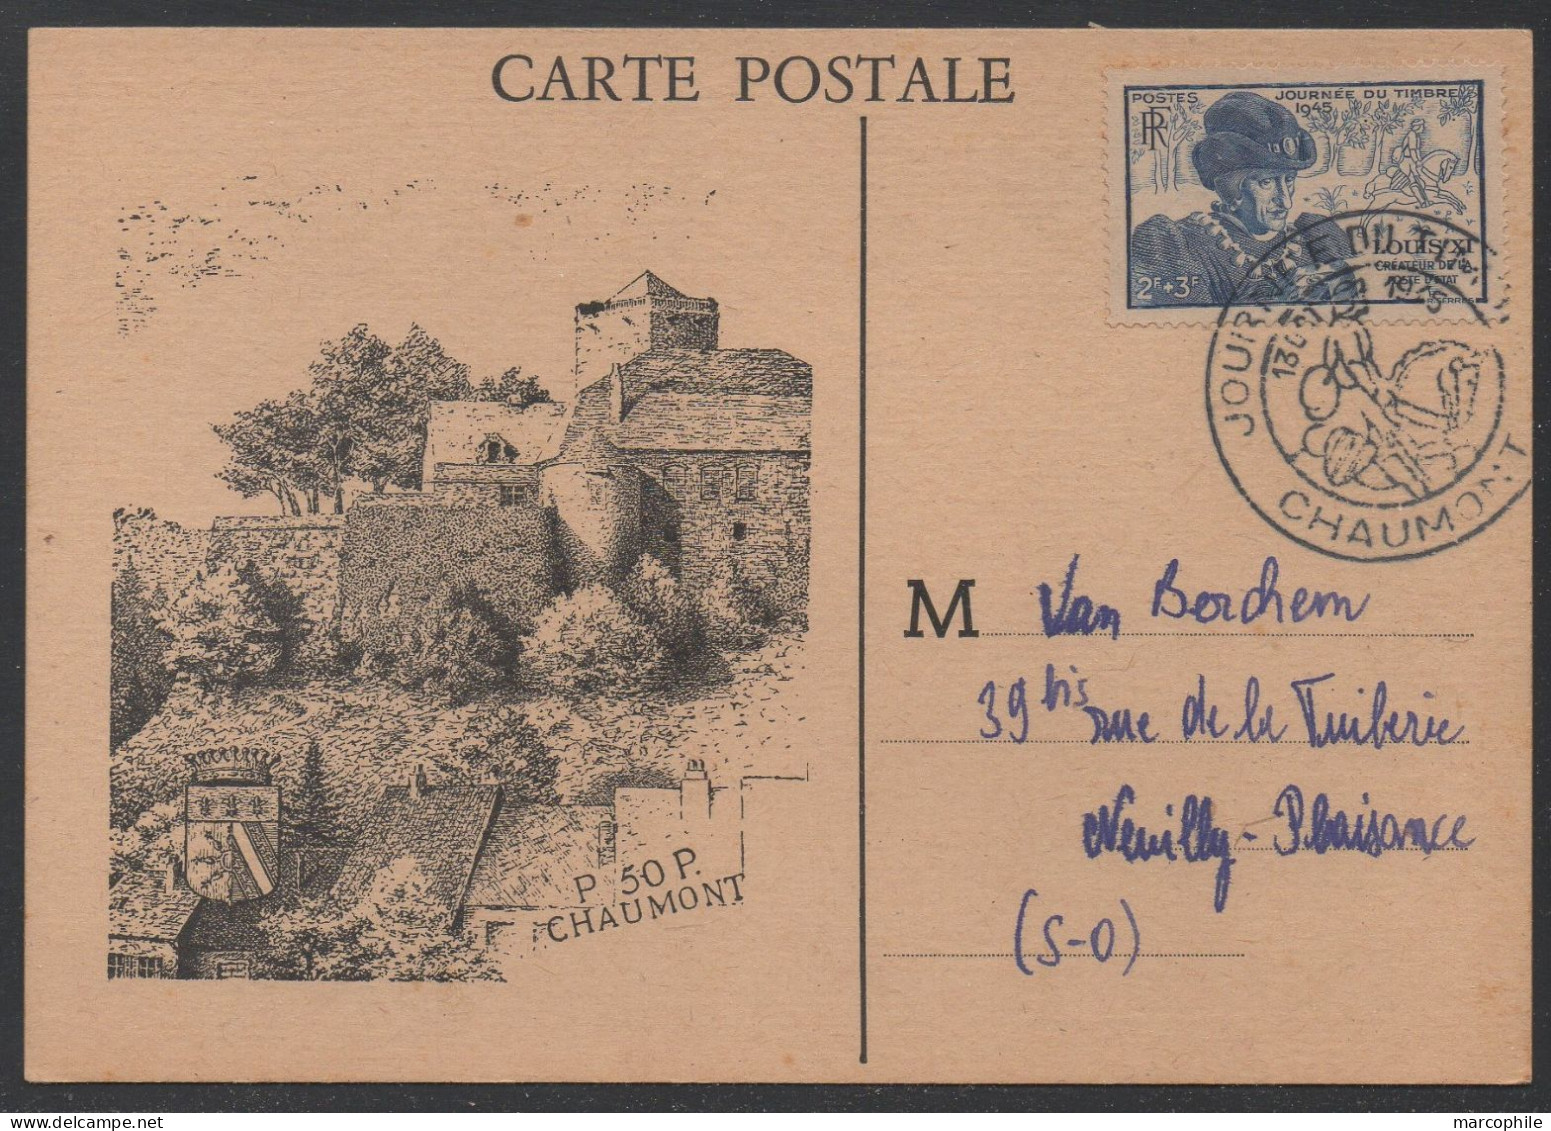 CHAUMONT - HAUTE MARNE / 1945 CARTE FDC JOURNEE DU TIMBRE  VOYAGEE / COTE 35.00 &euro; (ref 7215) - Stamp's Day